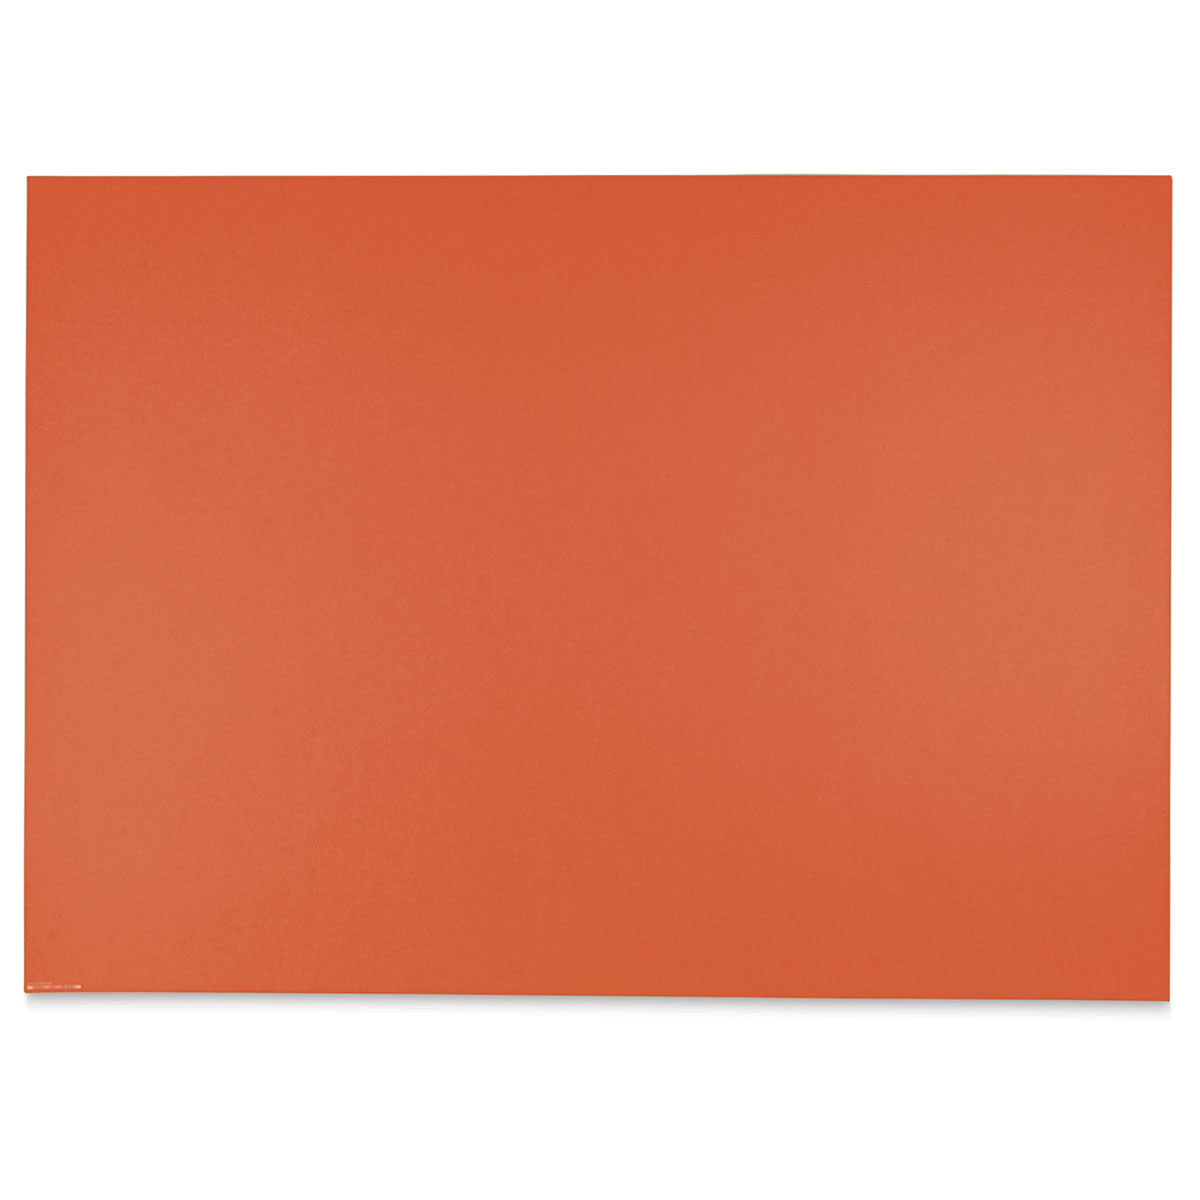 Blick Premium Construction Paper - 19-1/2 x 27-1/2, Holiday Red, Single Sheet